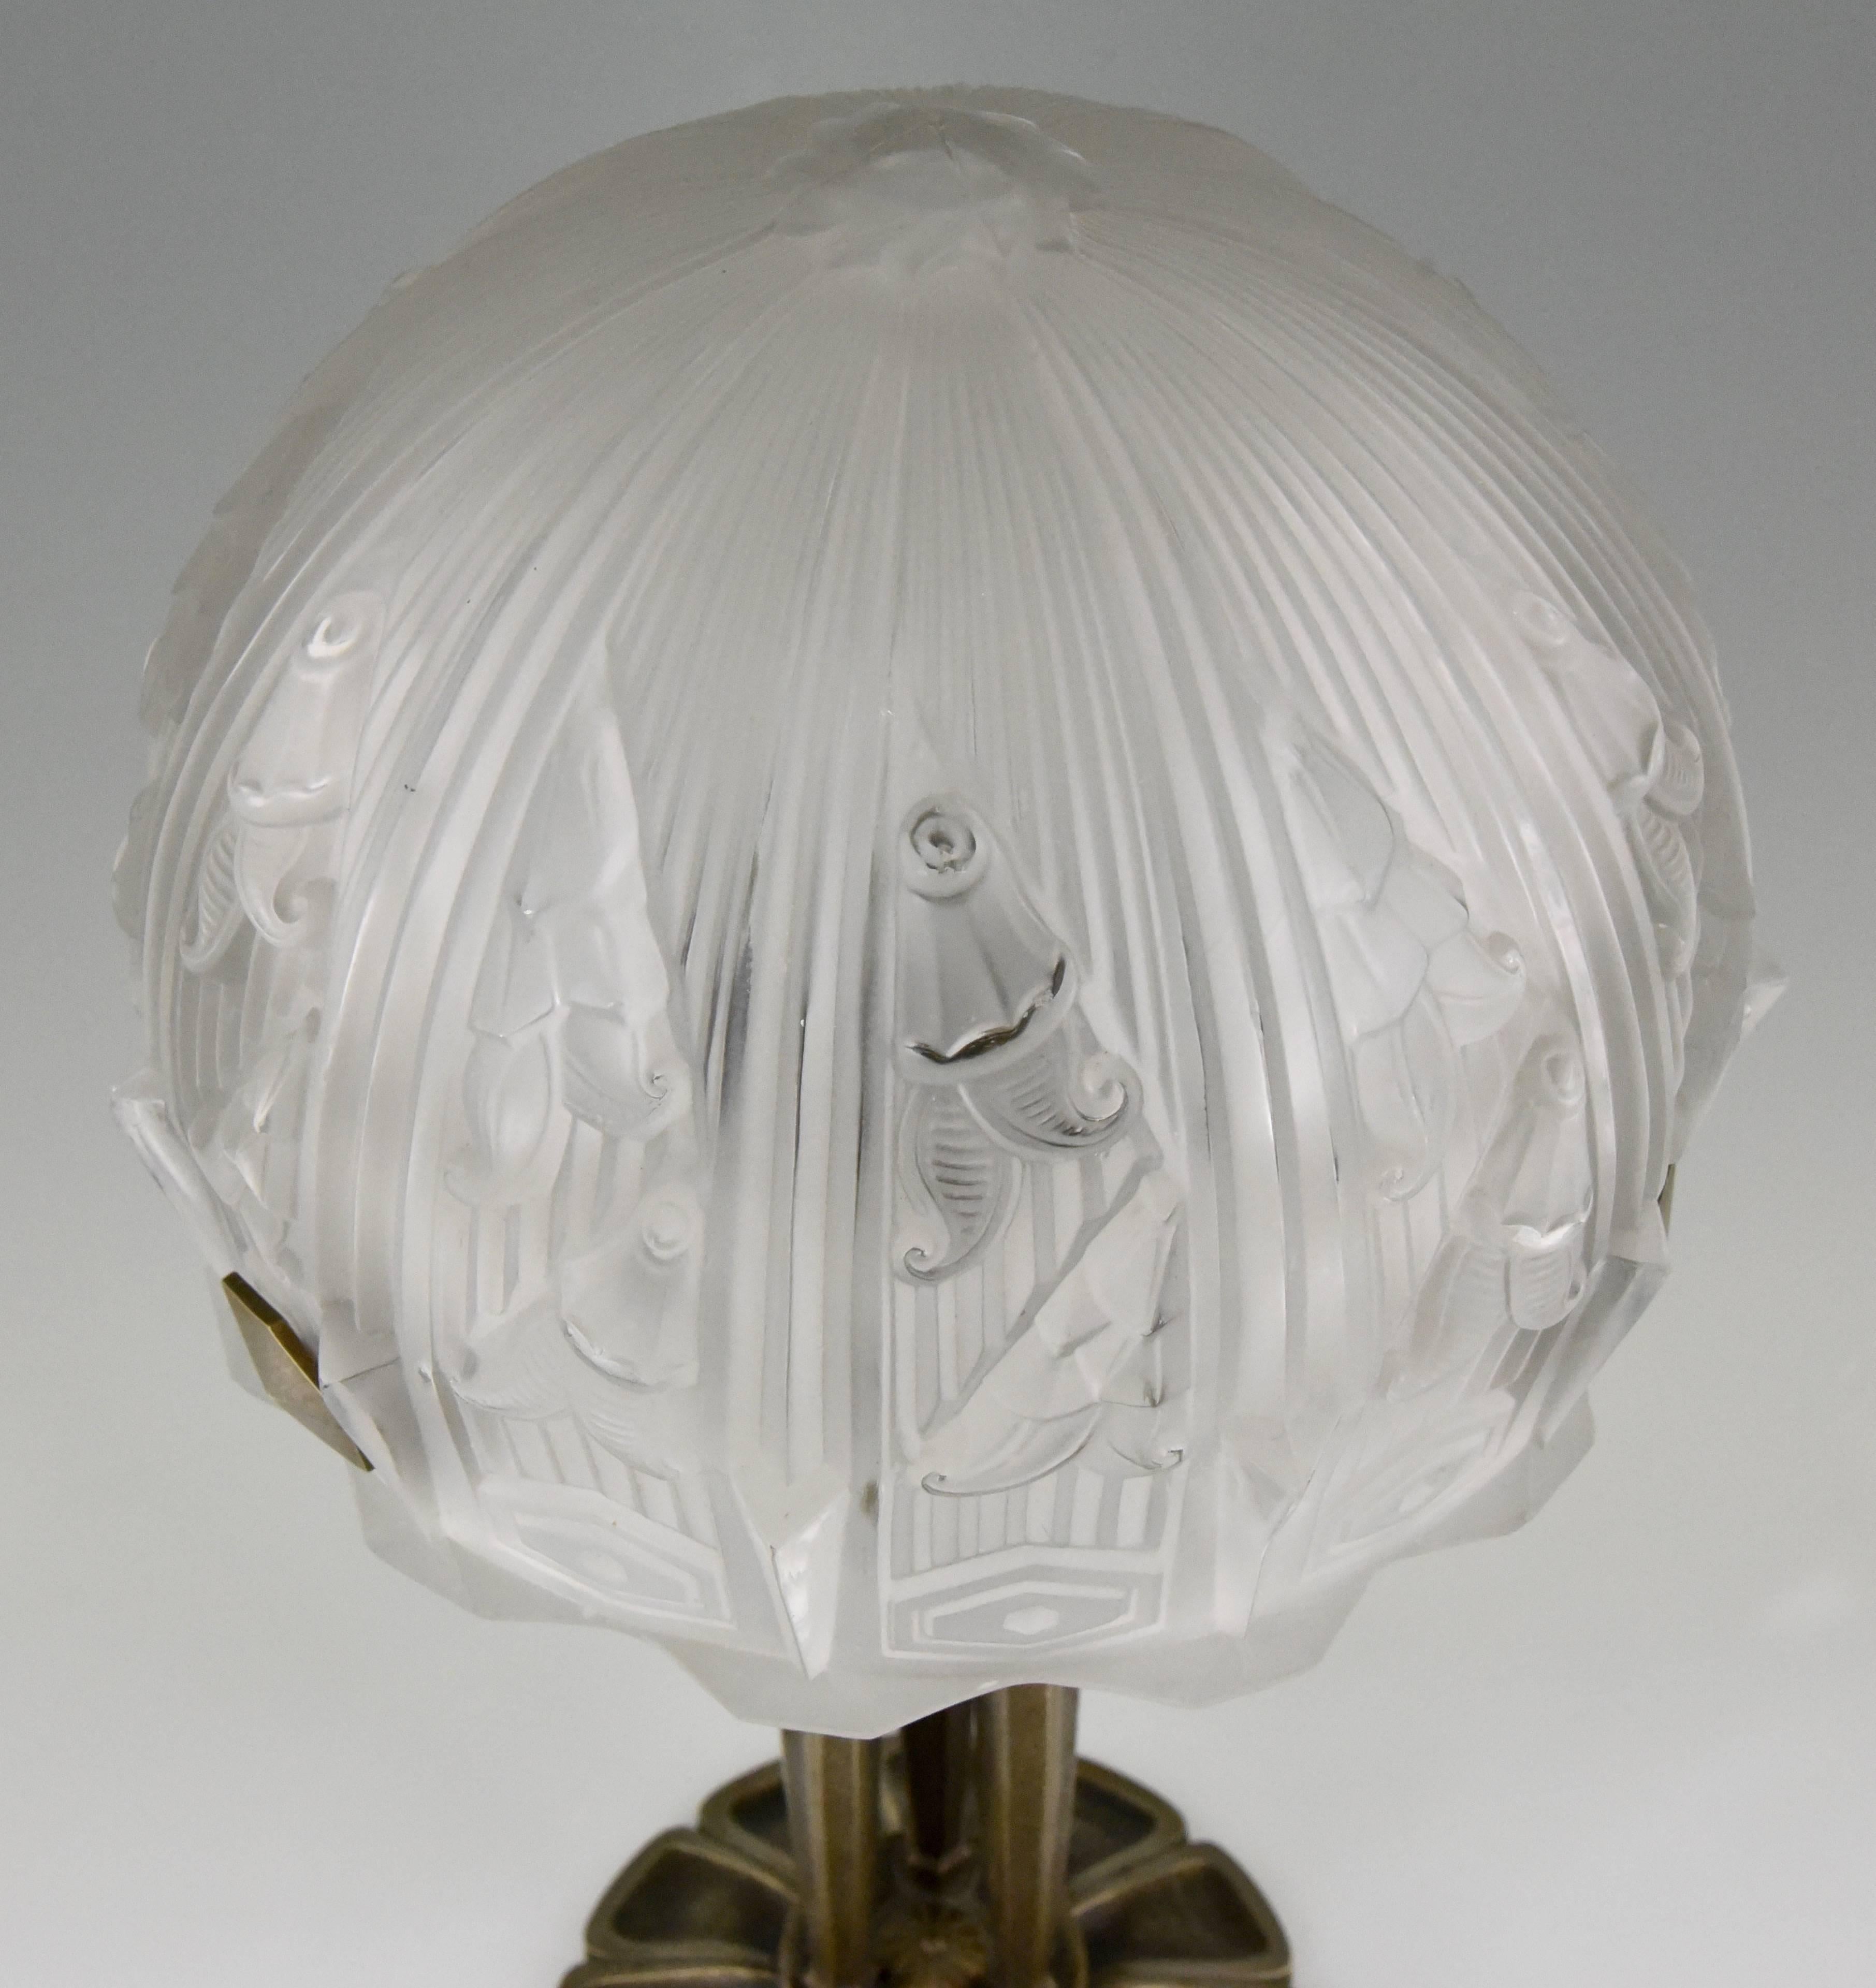 Mid-20th Century Art Deco Glass and Bronze Desk or Table Lamp RM, France, 1930